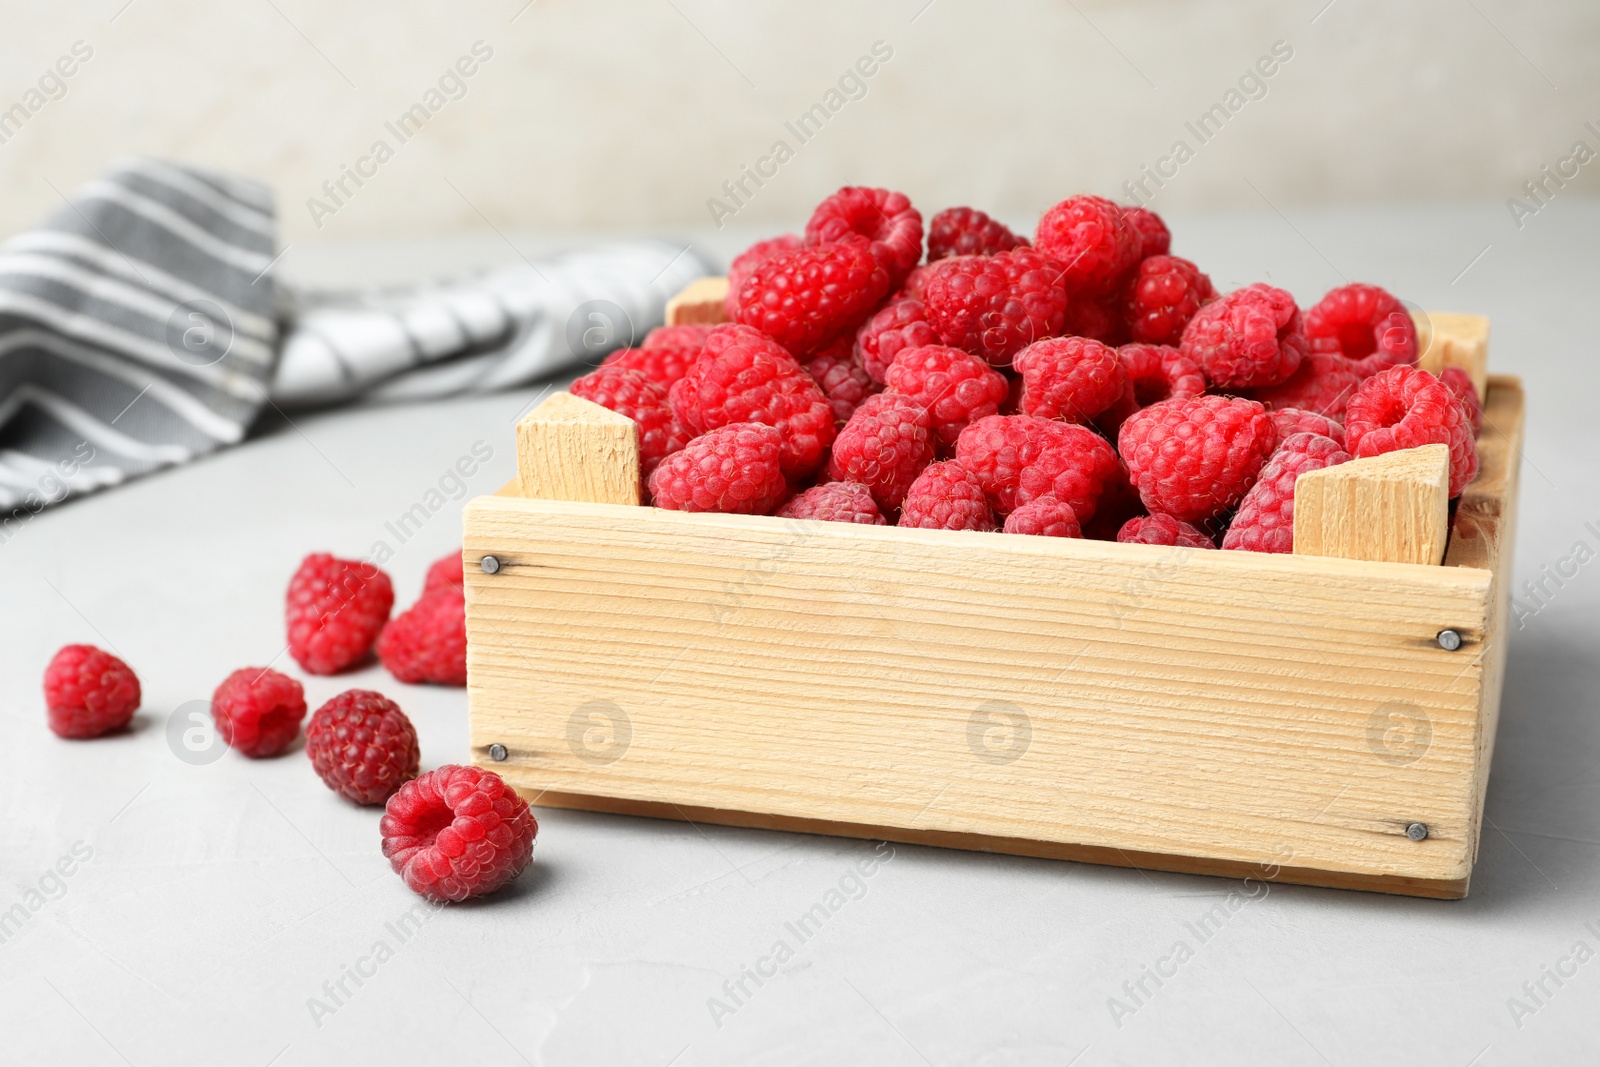 Photo of Wooden crate with delicious ripe raspberries on table against light background